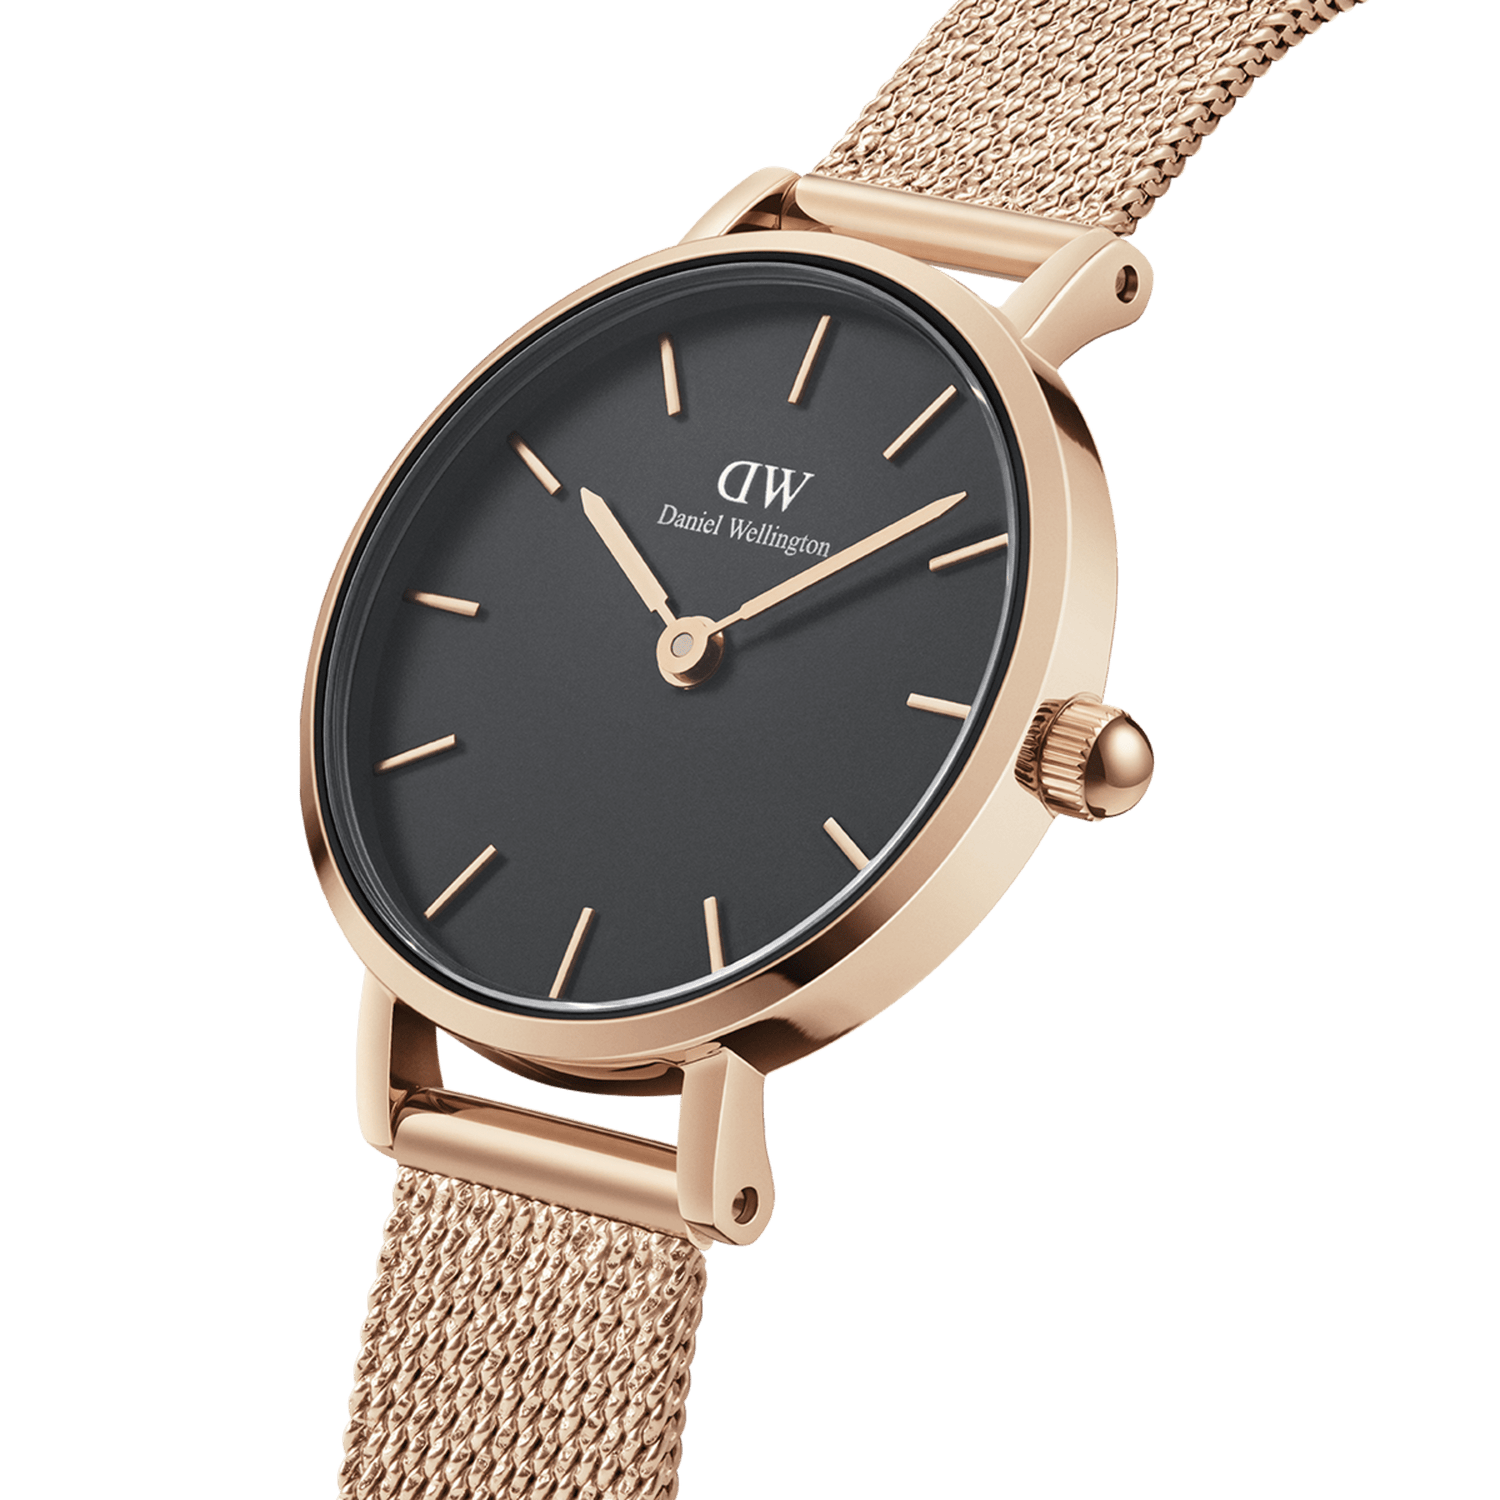 Petite Pressed Melrose - Small Rose Gold women's watch | DW